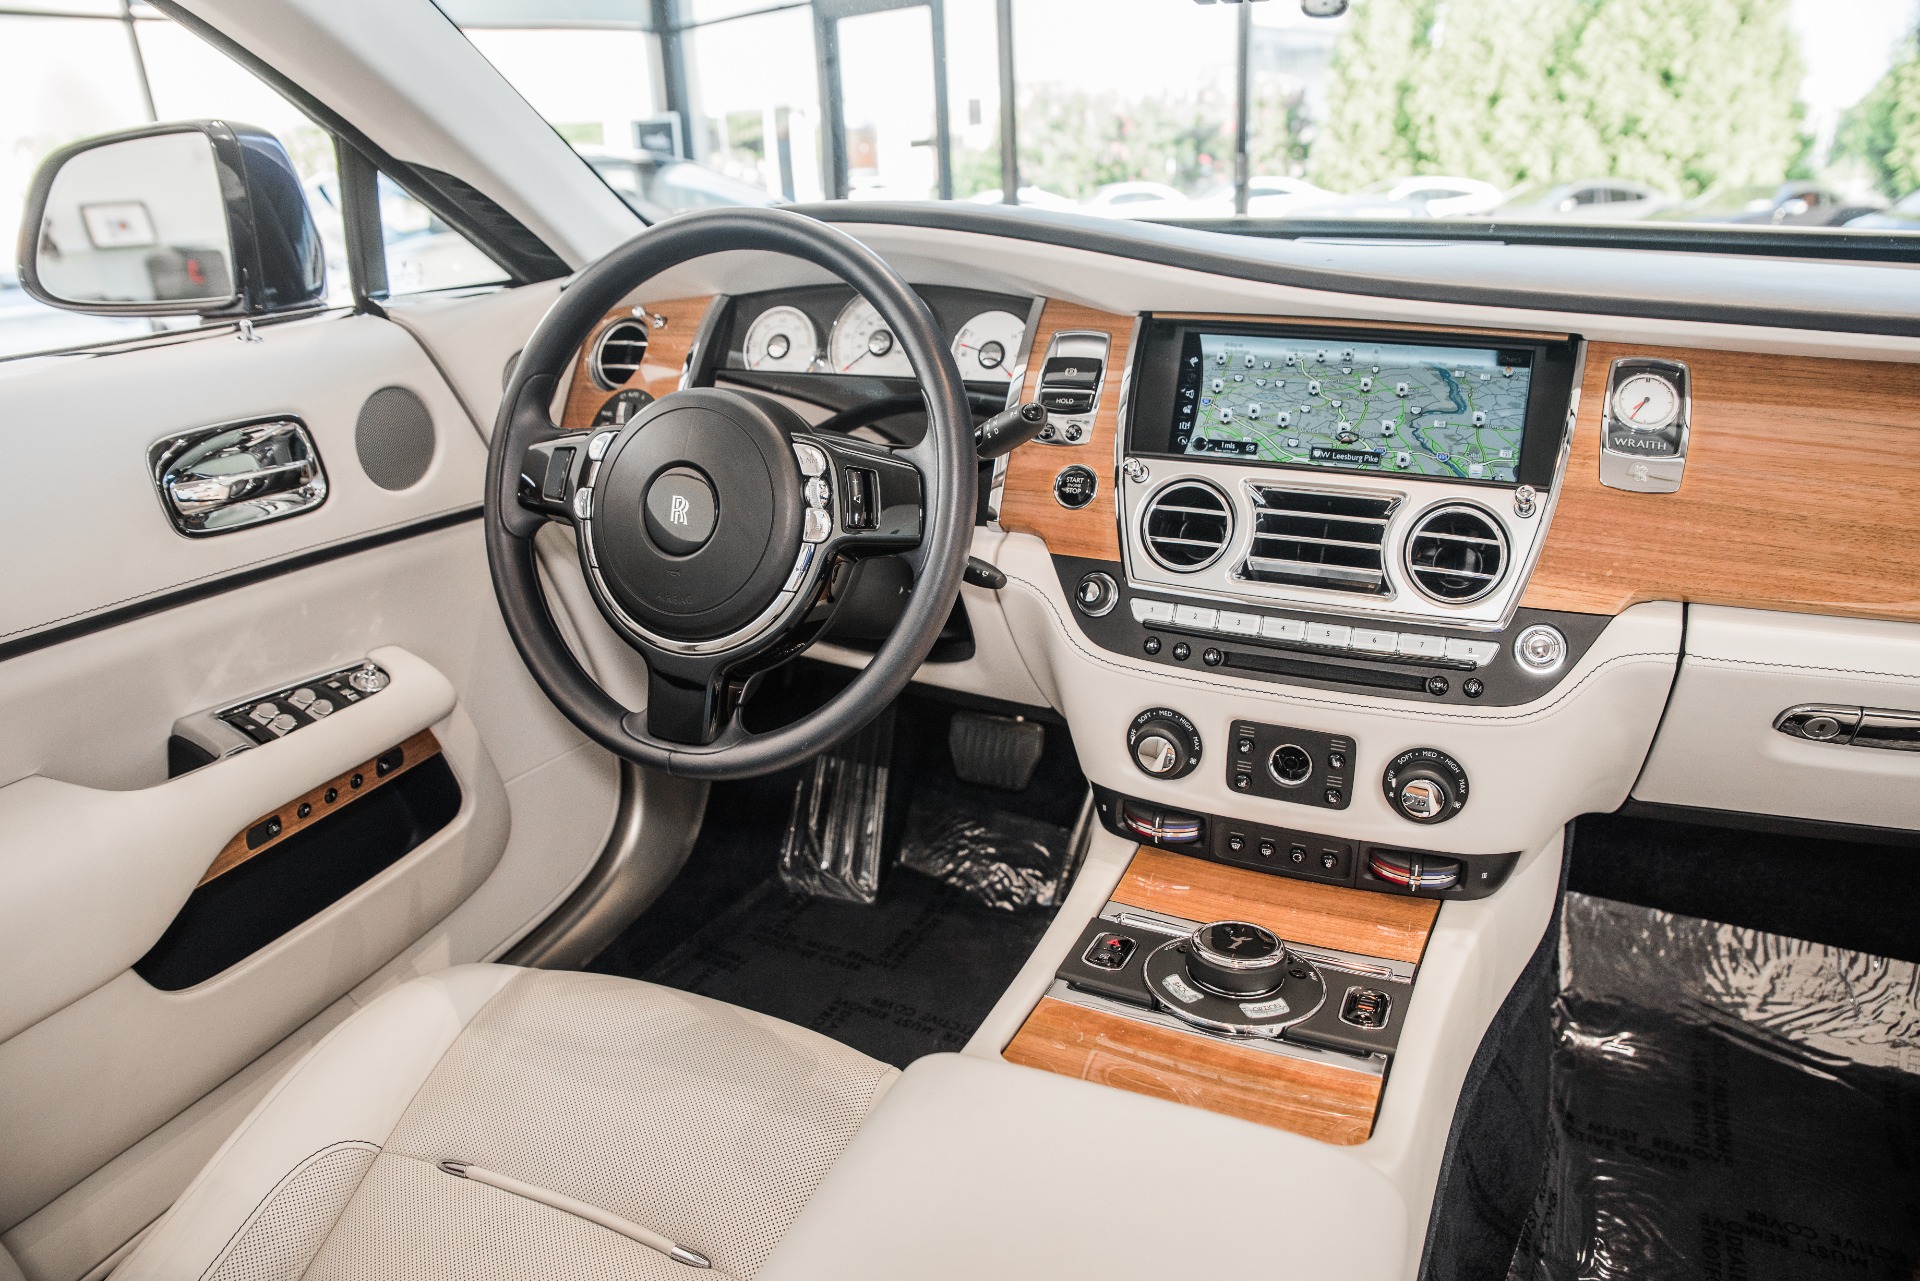 RollsRoyce Wraith by Mansory 2020  Interior and Exterior Design   Engine V12 66 L 636 Ps 800 Nm Buy this car  httpshollmanninternational httpswwwinstagramcomhollmannint  Price 517 65000   By 0260 CARs  Facebook